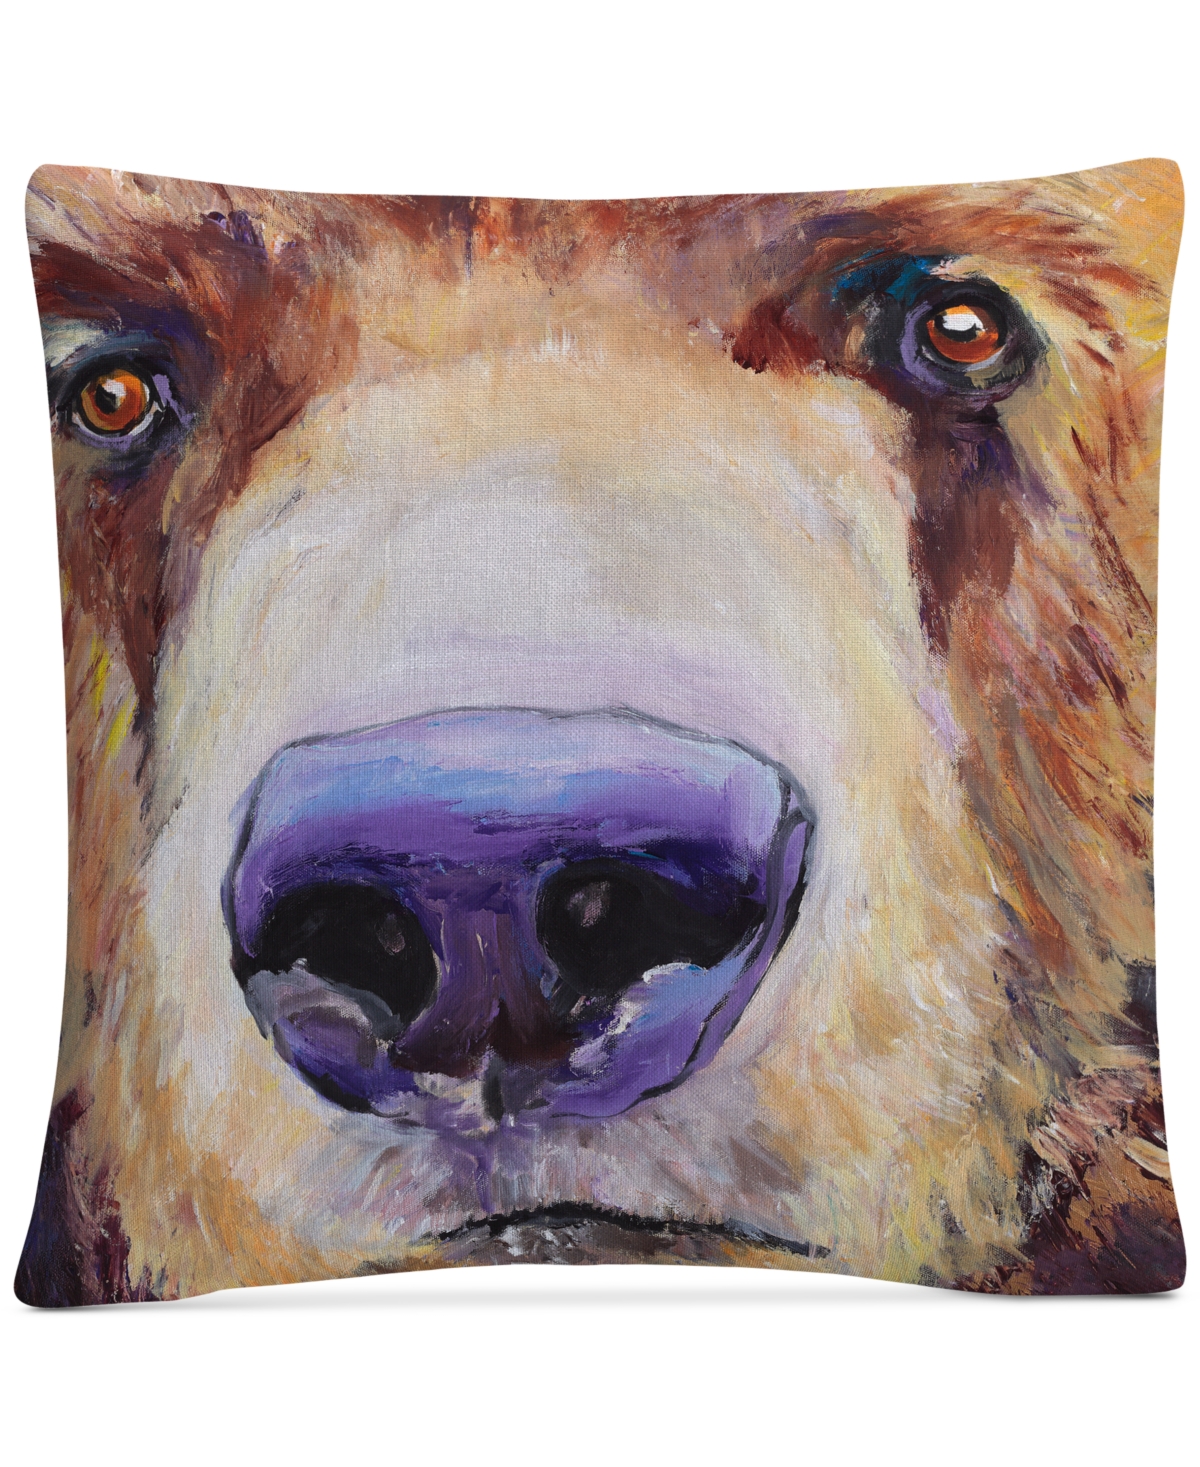 6960139 Pat Saunders-White The Sniffer Decorative Pillow,  sku 6960139